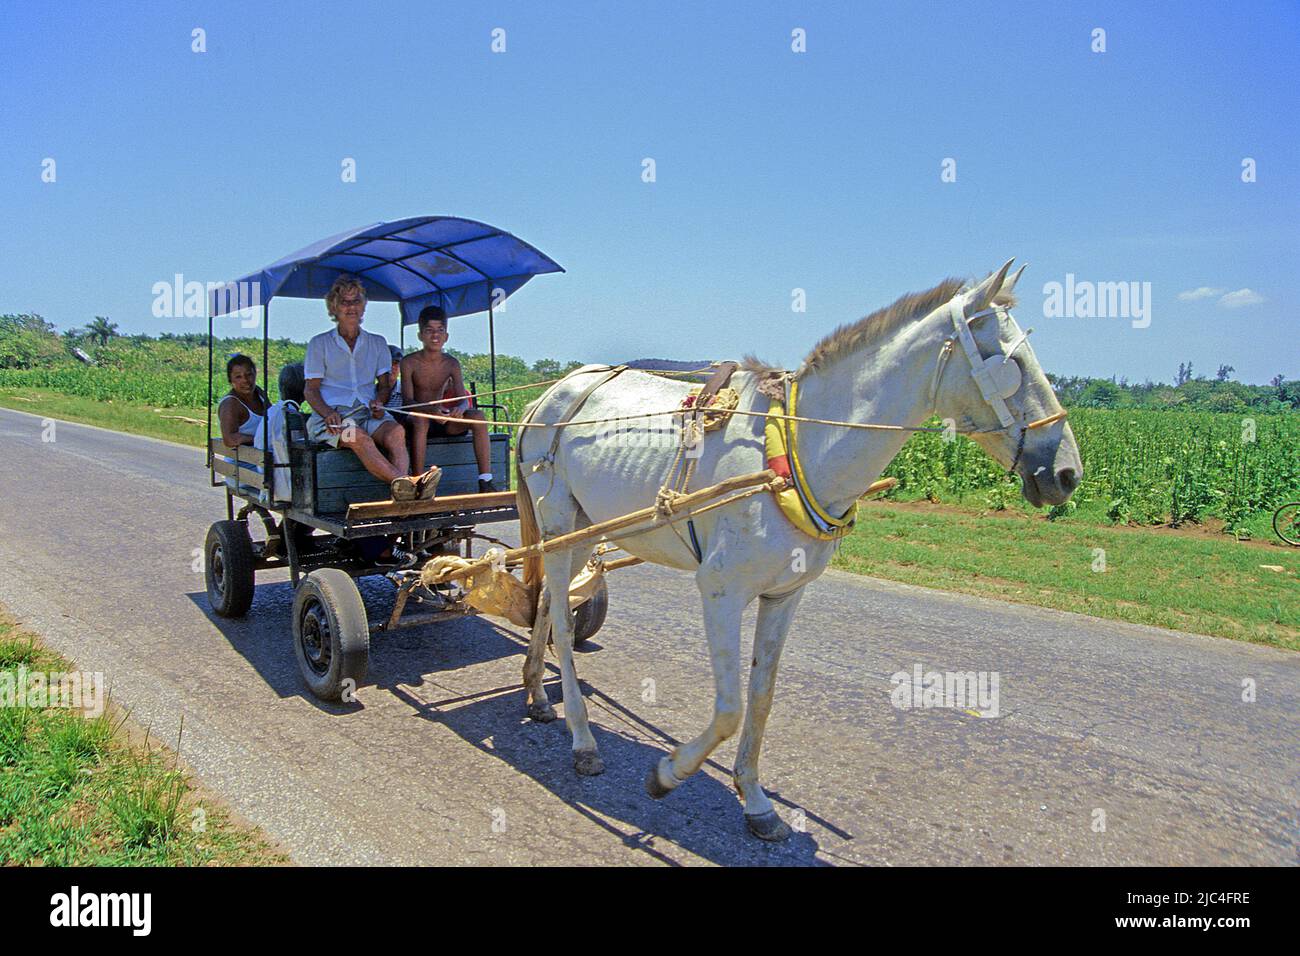 Cuban people on a horse-drawn carriage, popular transport, St. Lucia, Cuba, Caribbean Stock Photo